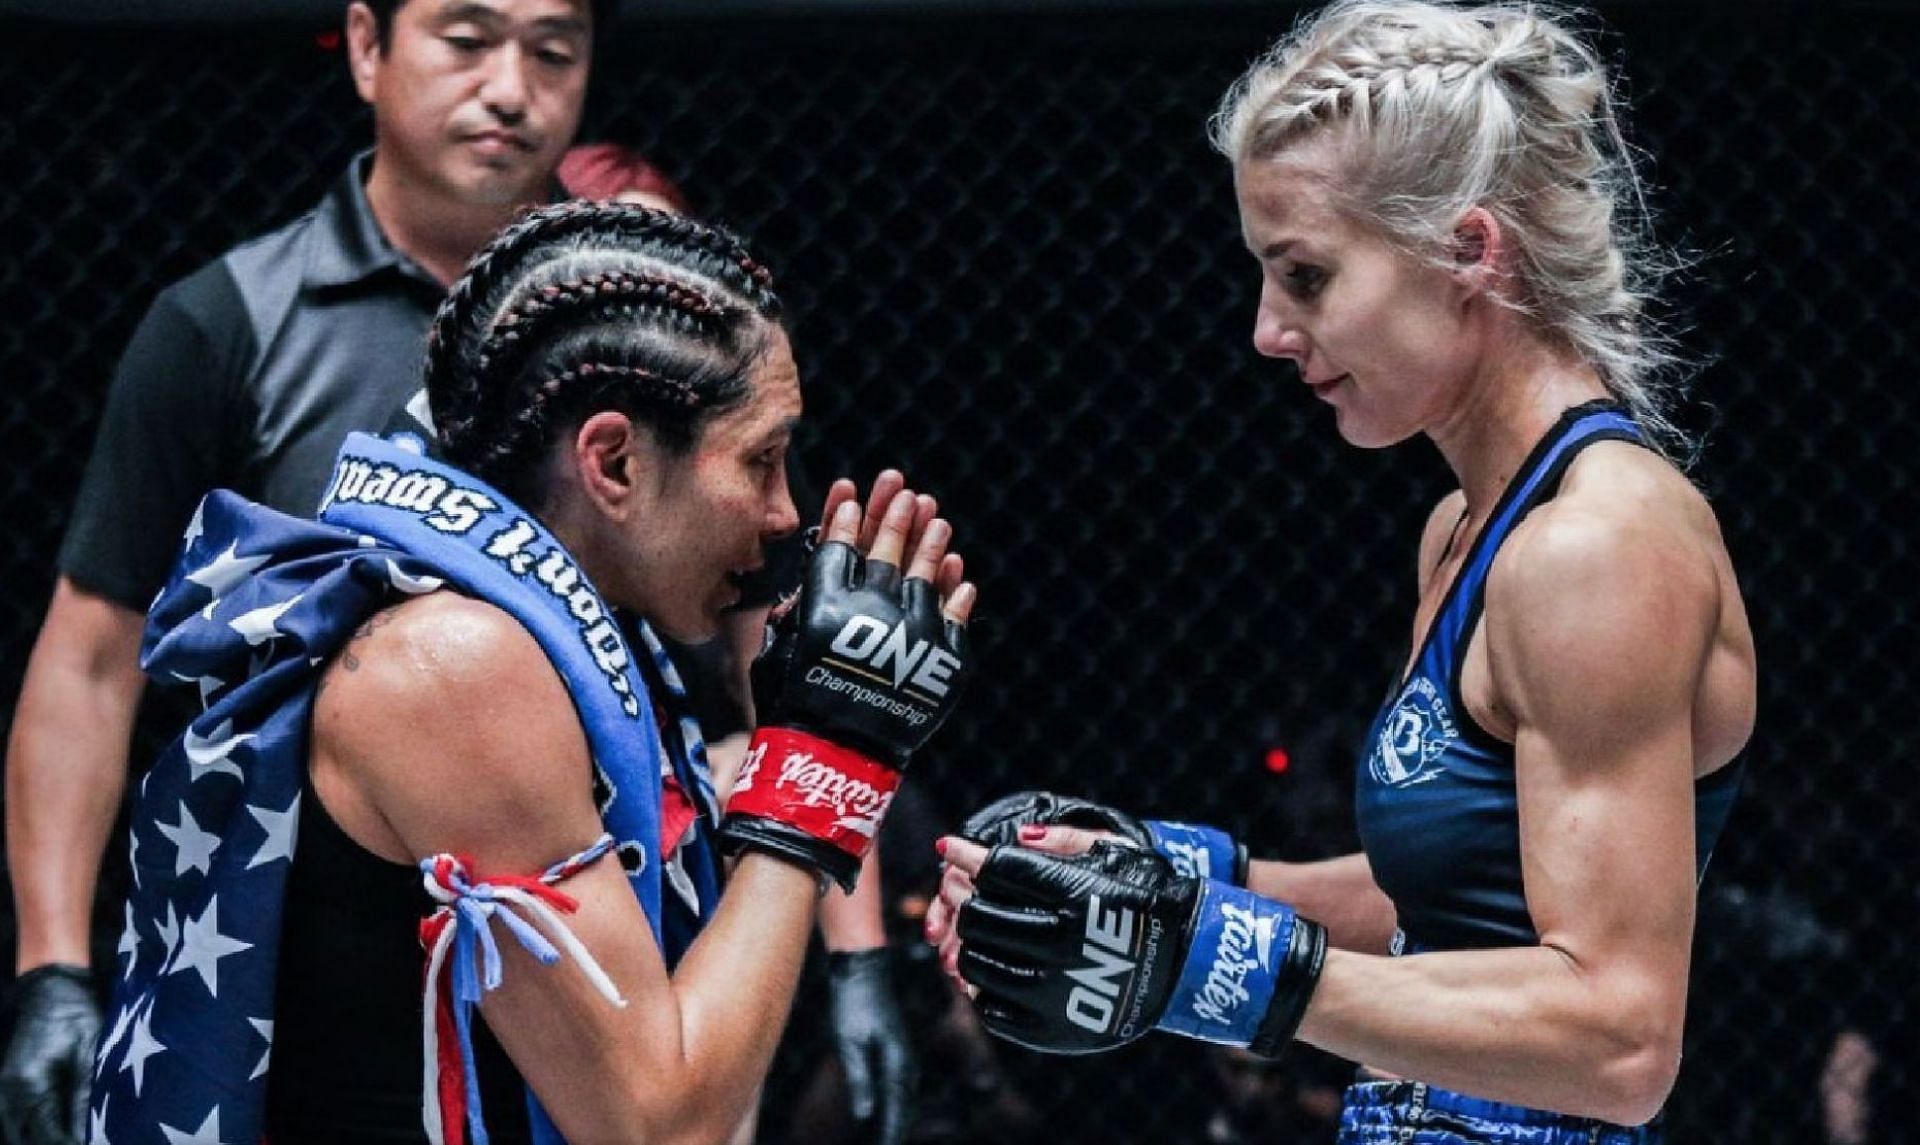 Janet Todd (L) and Ekaterina Vandaryeva (R) share a wholesome moment after their epic encounter. | Photo by ONE Championship